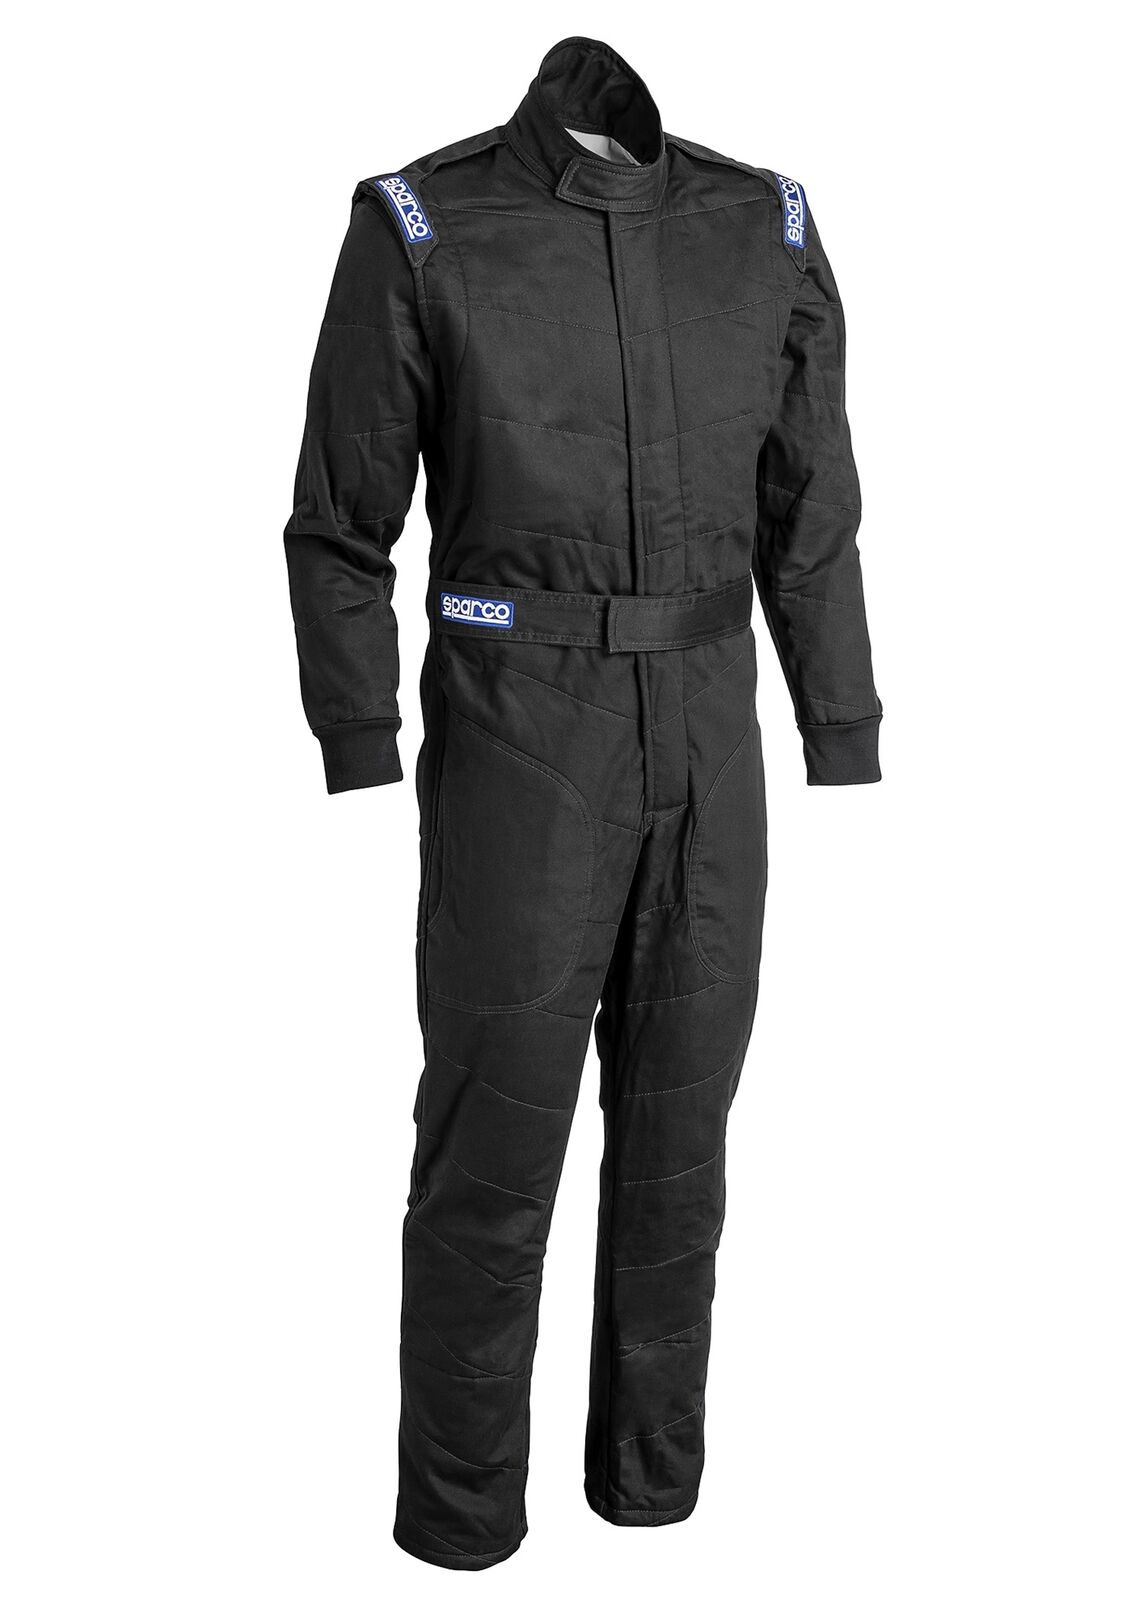 Sparco Jade 3 Racing Suit - SFI 3.2A/5 Multiple Sizes